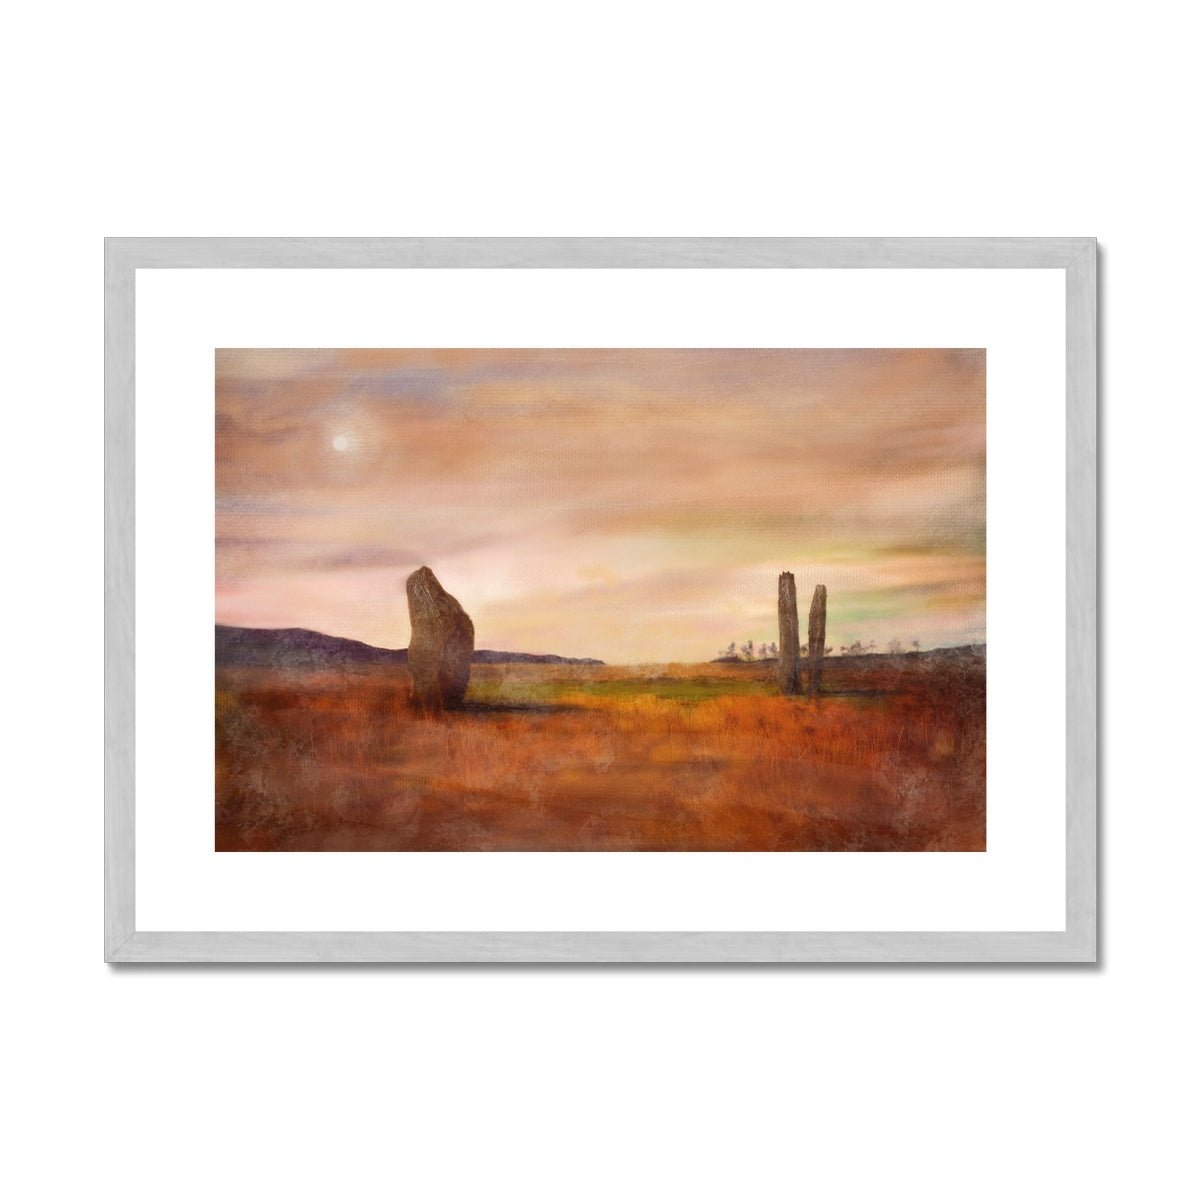 Machrie Moor Moonlight Painting | Antique Framed & Mounted Prints From Scotland-Antique Framed & Mounted Prints-Arran Art Gallery-A2 Landscape-Silver Frame-Paintings, Prints, Homeware, Art Gifts From Scotland By Scottish Artist Kevin Hunter